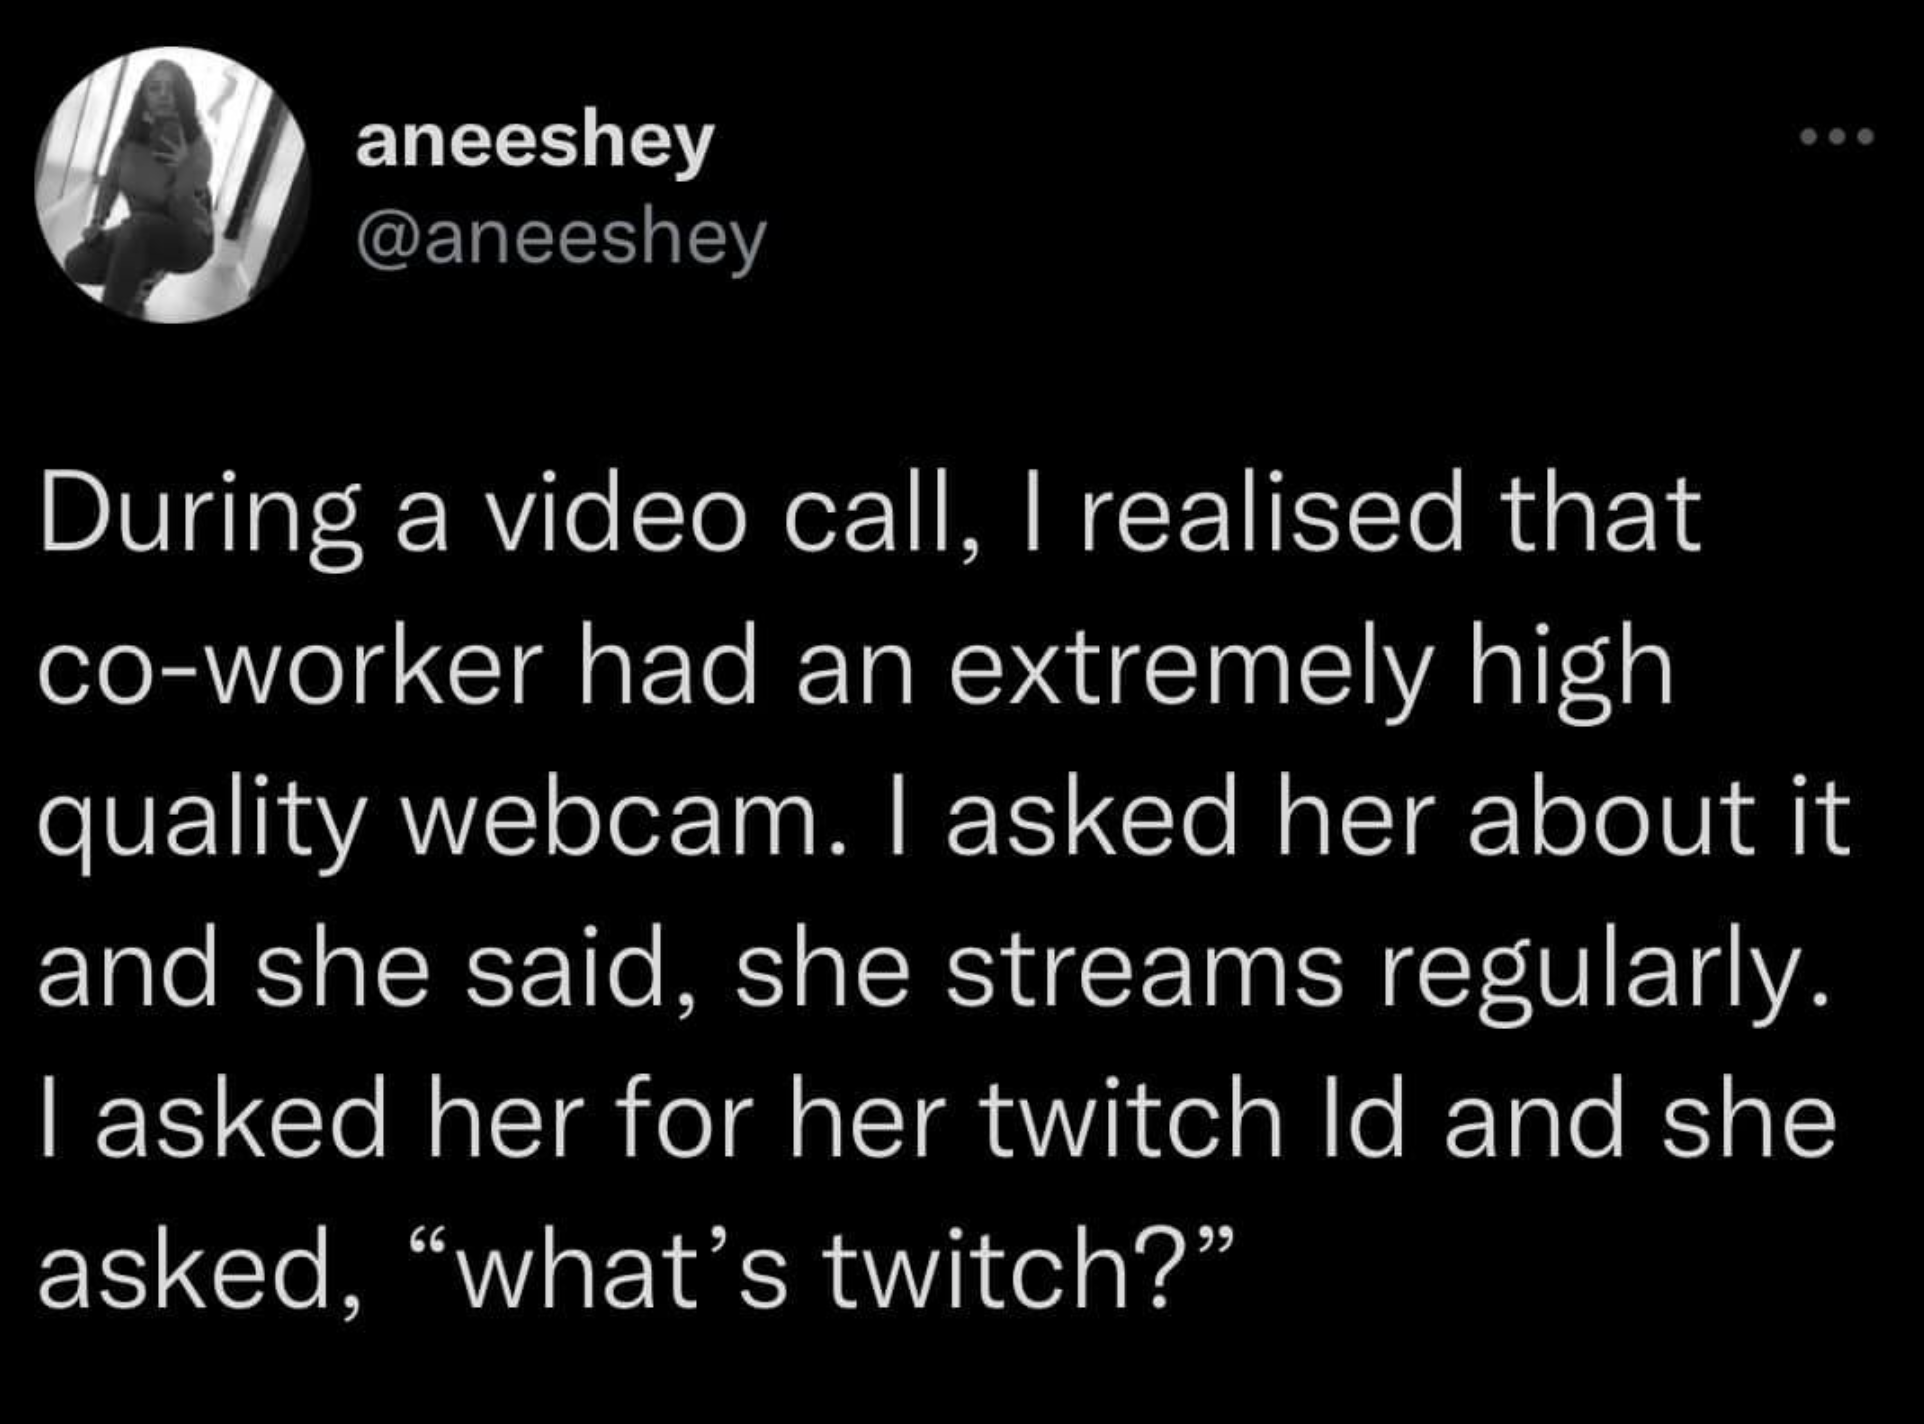 funny gaming memes  - libertarian t shirts - aneeshey During a video call, I realised that coworker had an extremely high quality webcam. I asked her about it and she said, she streams regularly. I asked her for her twitch Id and she asked, what's twitch?